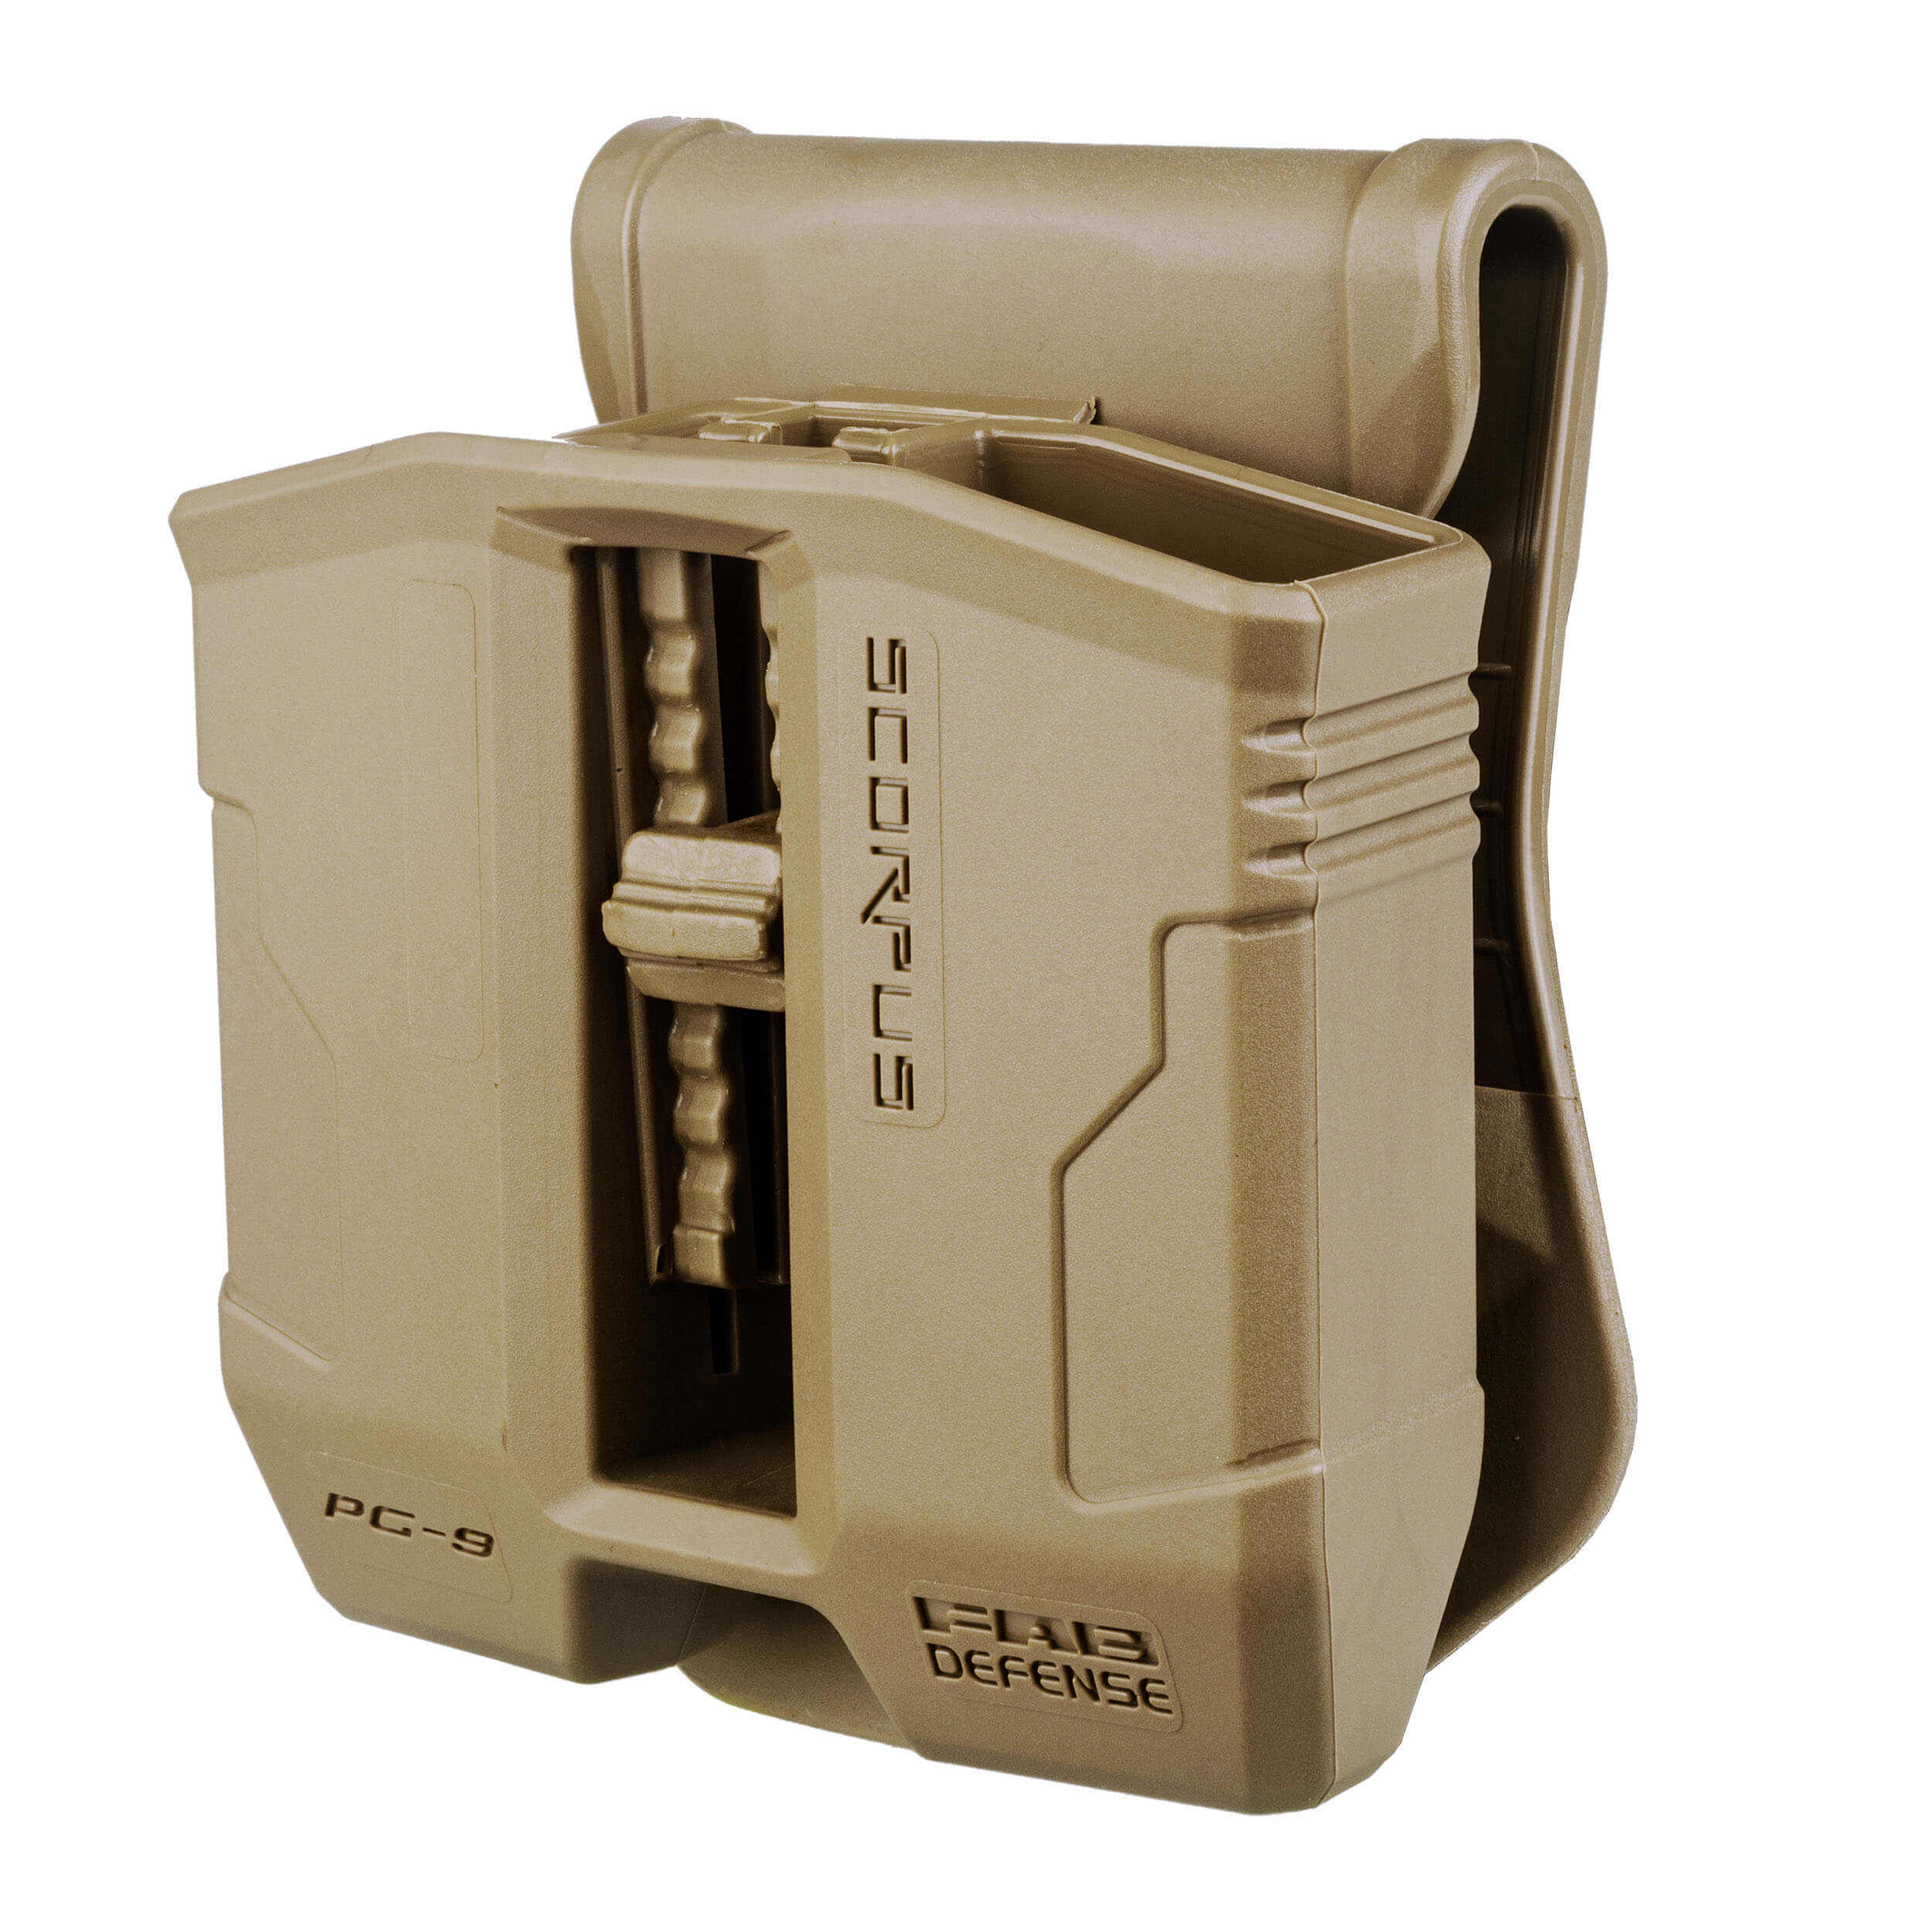 Double Magazine Pouch 360° for Glock 17, 19, 22, 23, 25, 26, 27, 31, 32, 33, 34, 35, 37, 38, 39